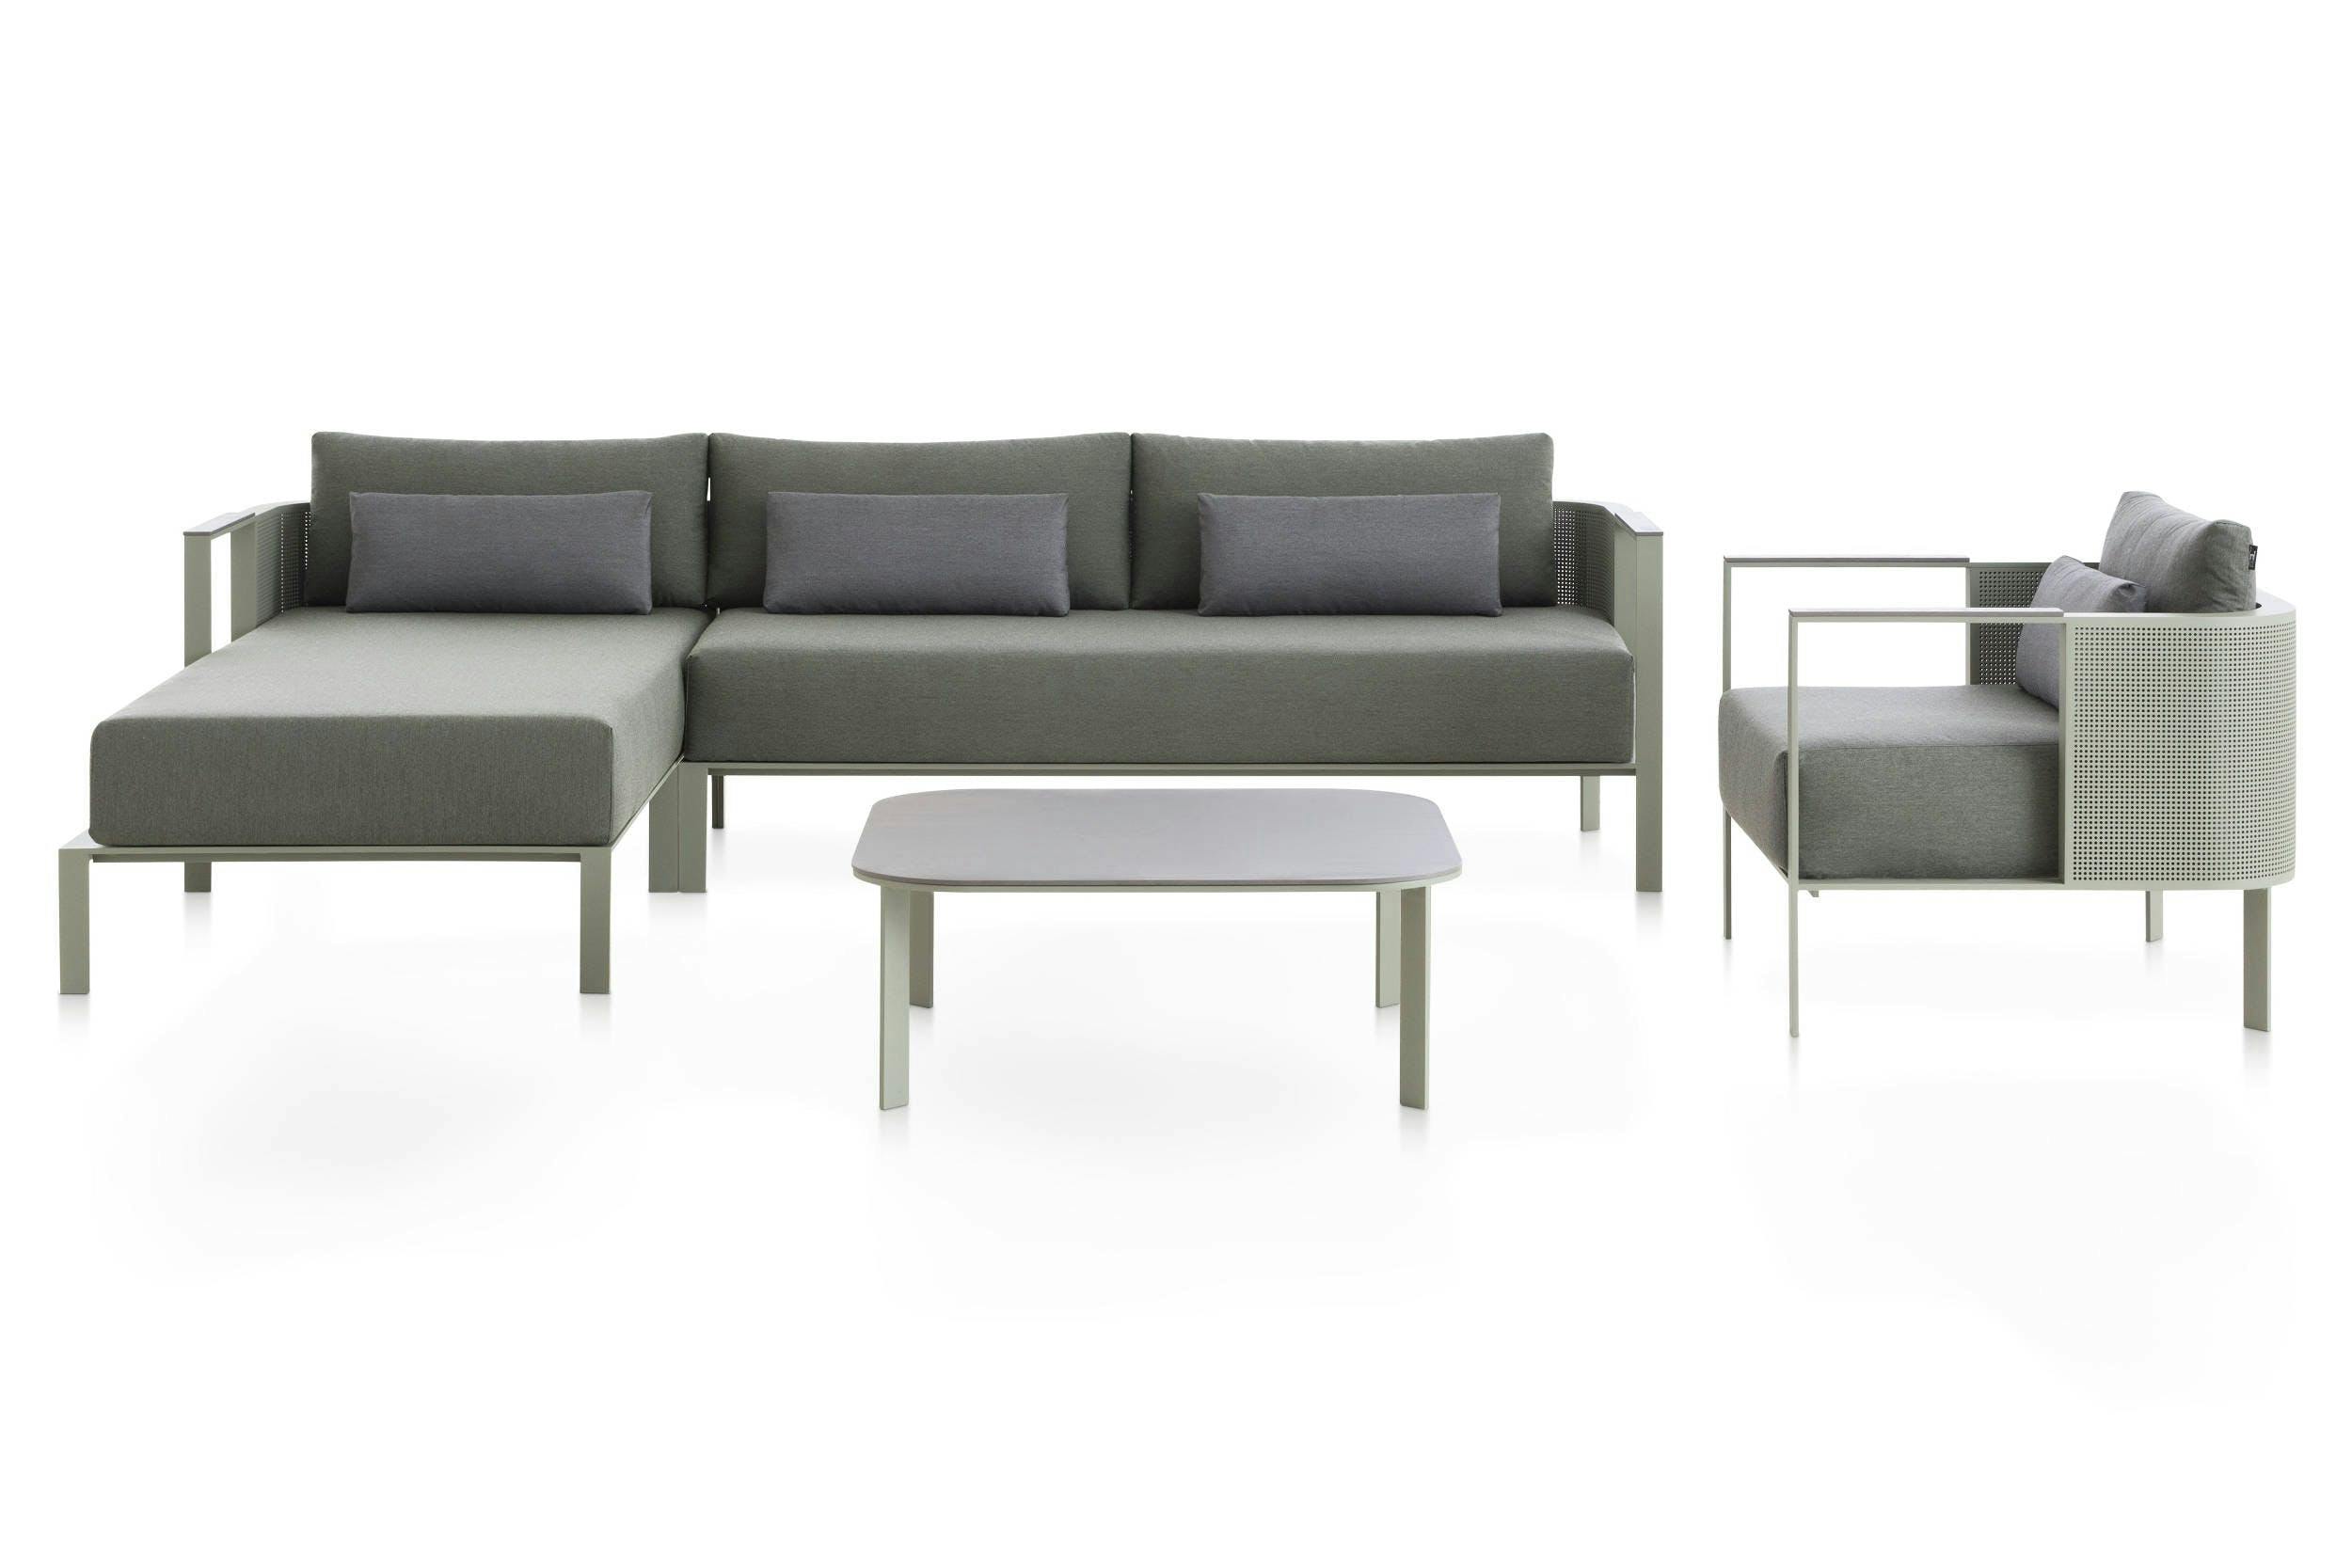 Image 33 of Solanas composition 2 1 in Outdoors spaces that break design boundaries with indoors - Cosentino